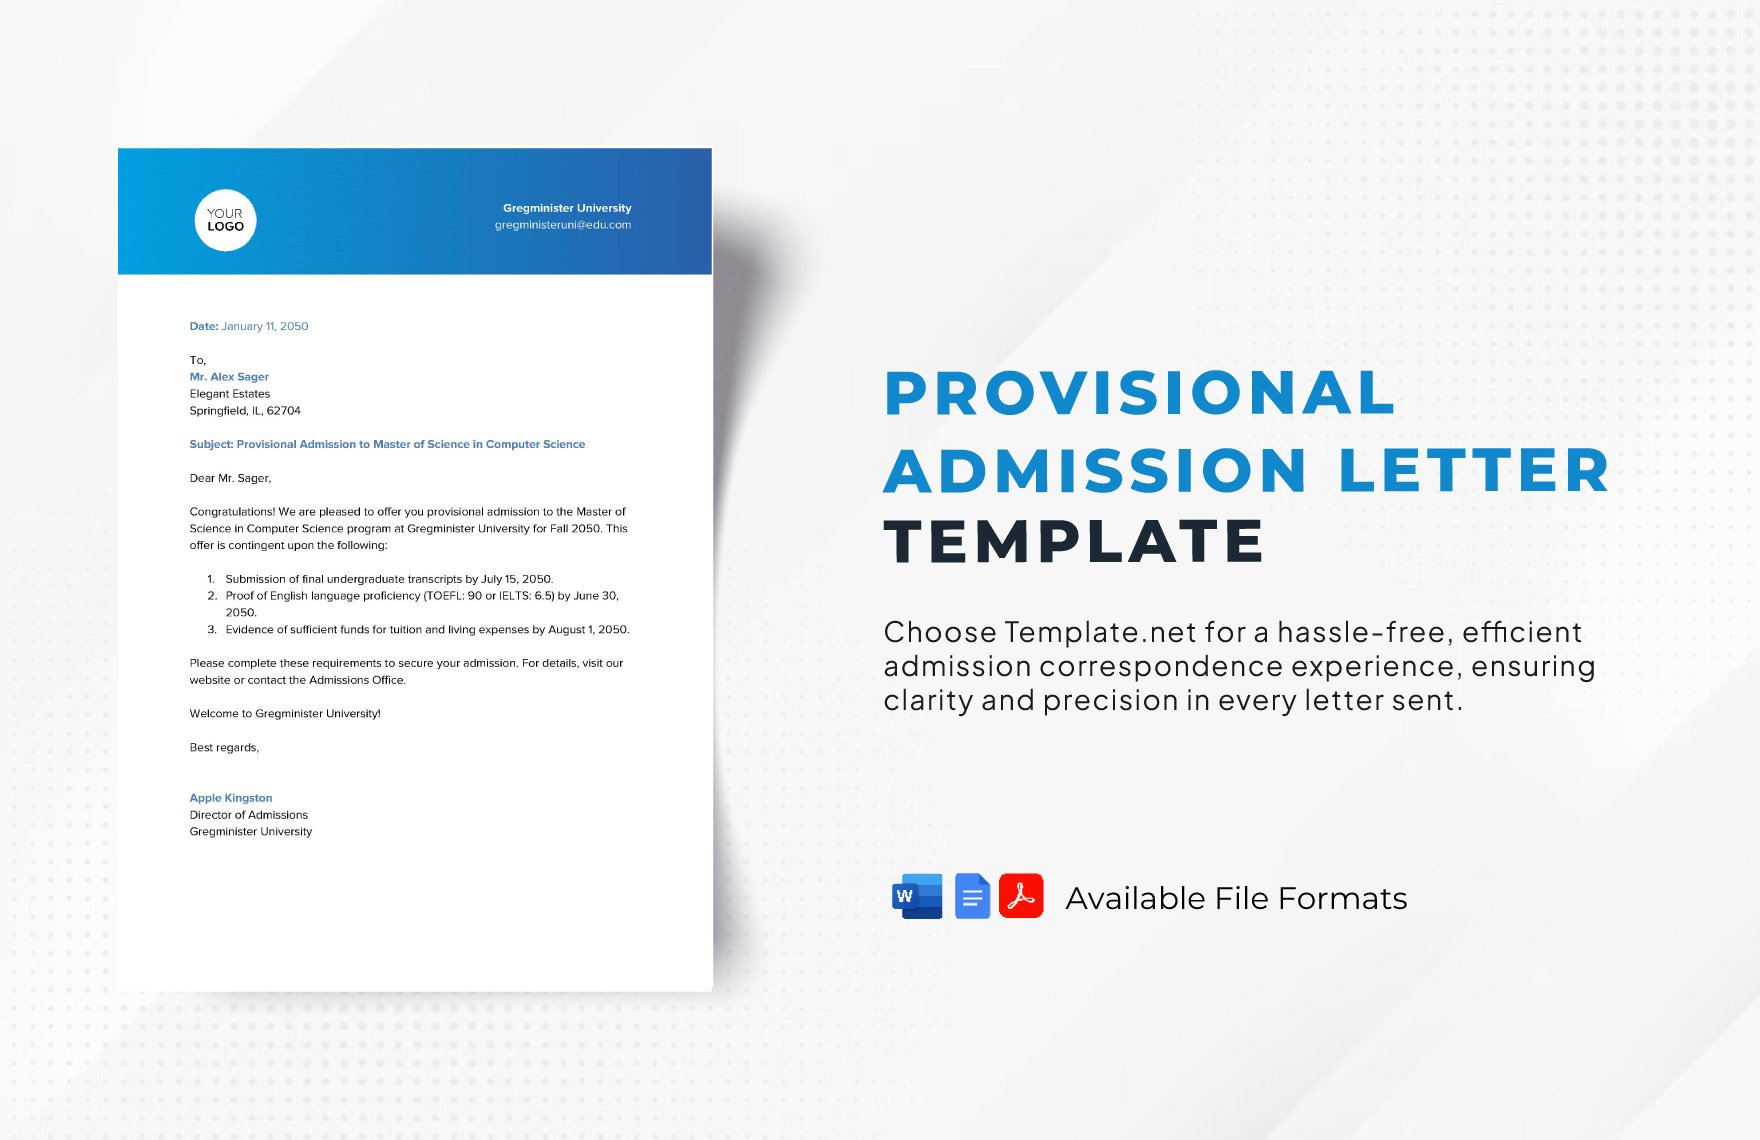 Provisional Admission Letter Template